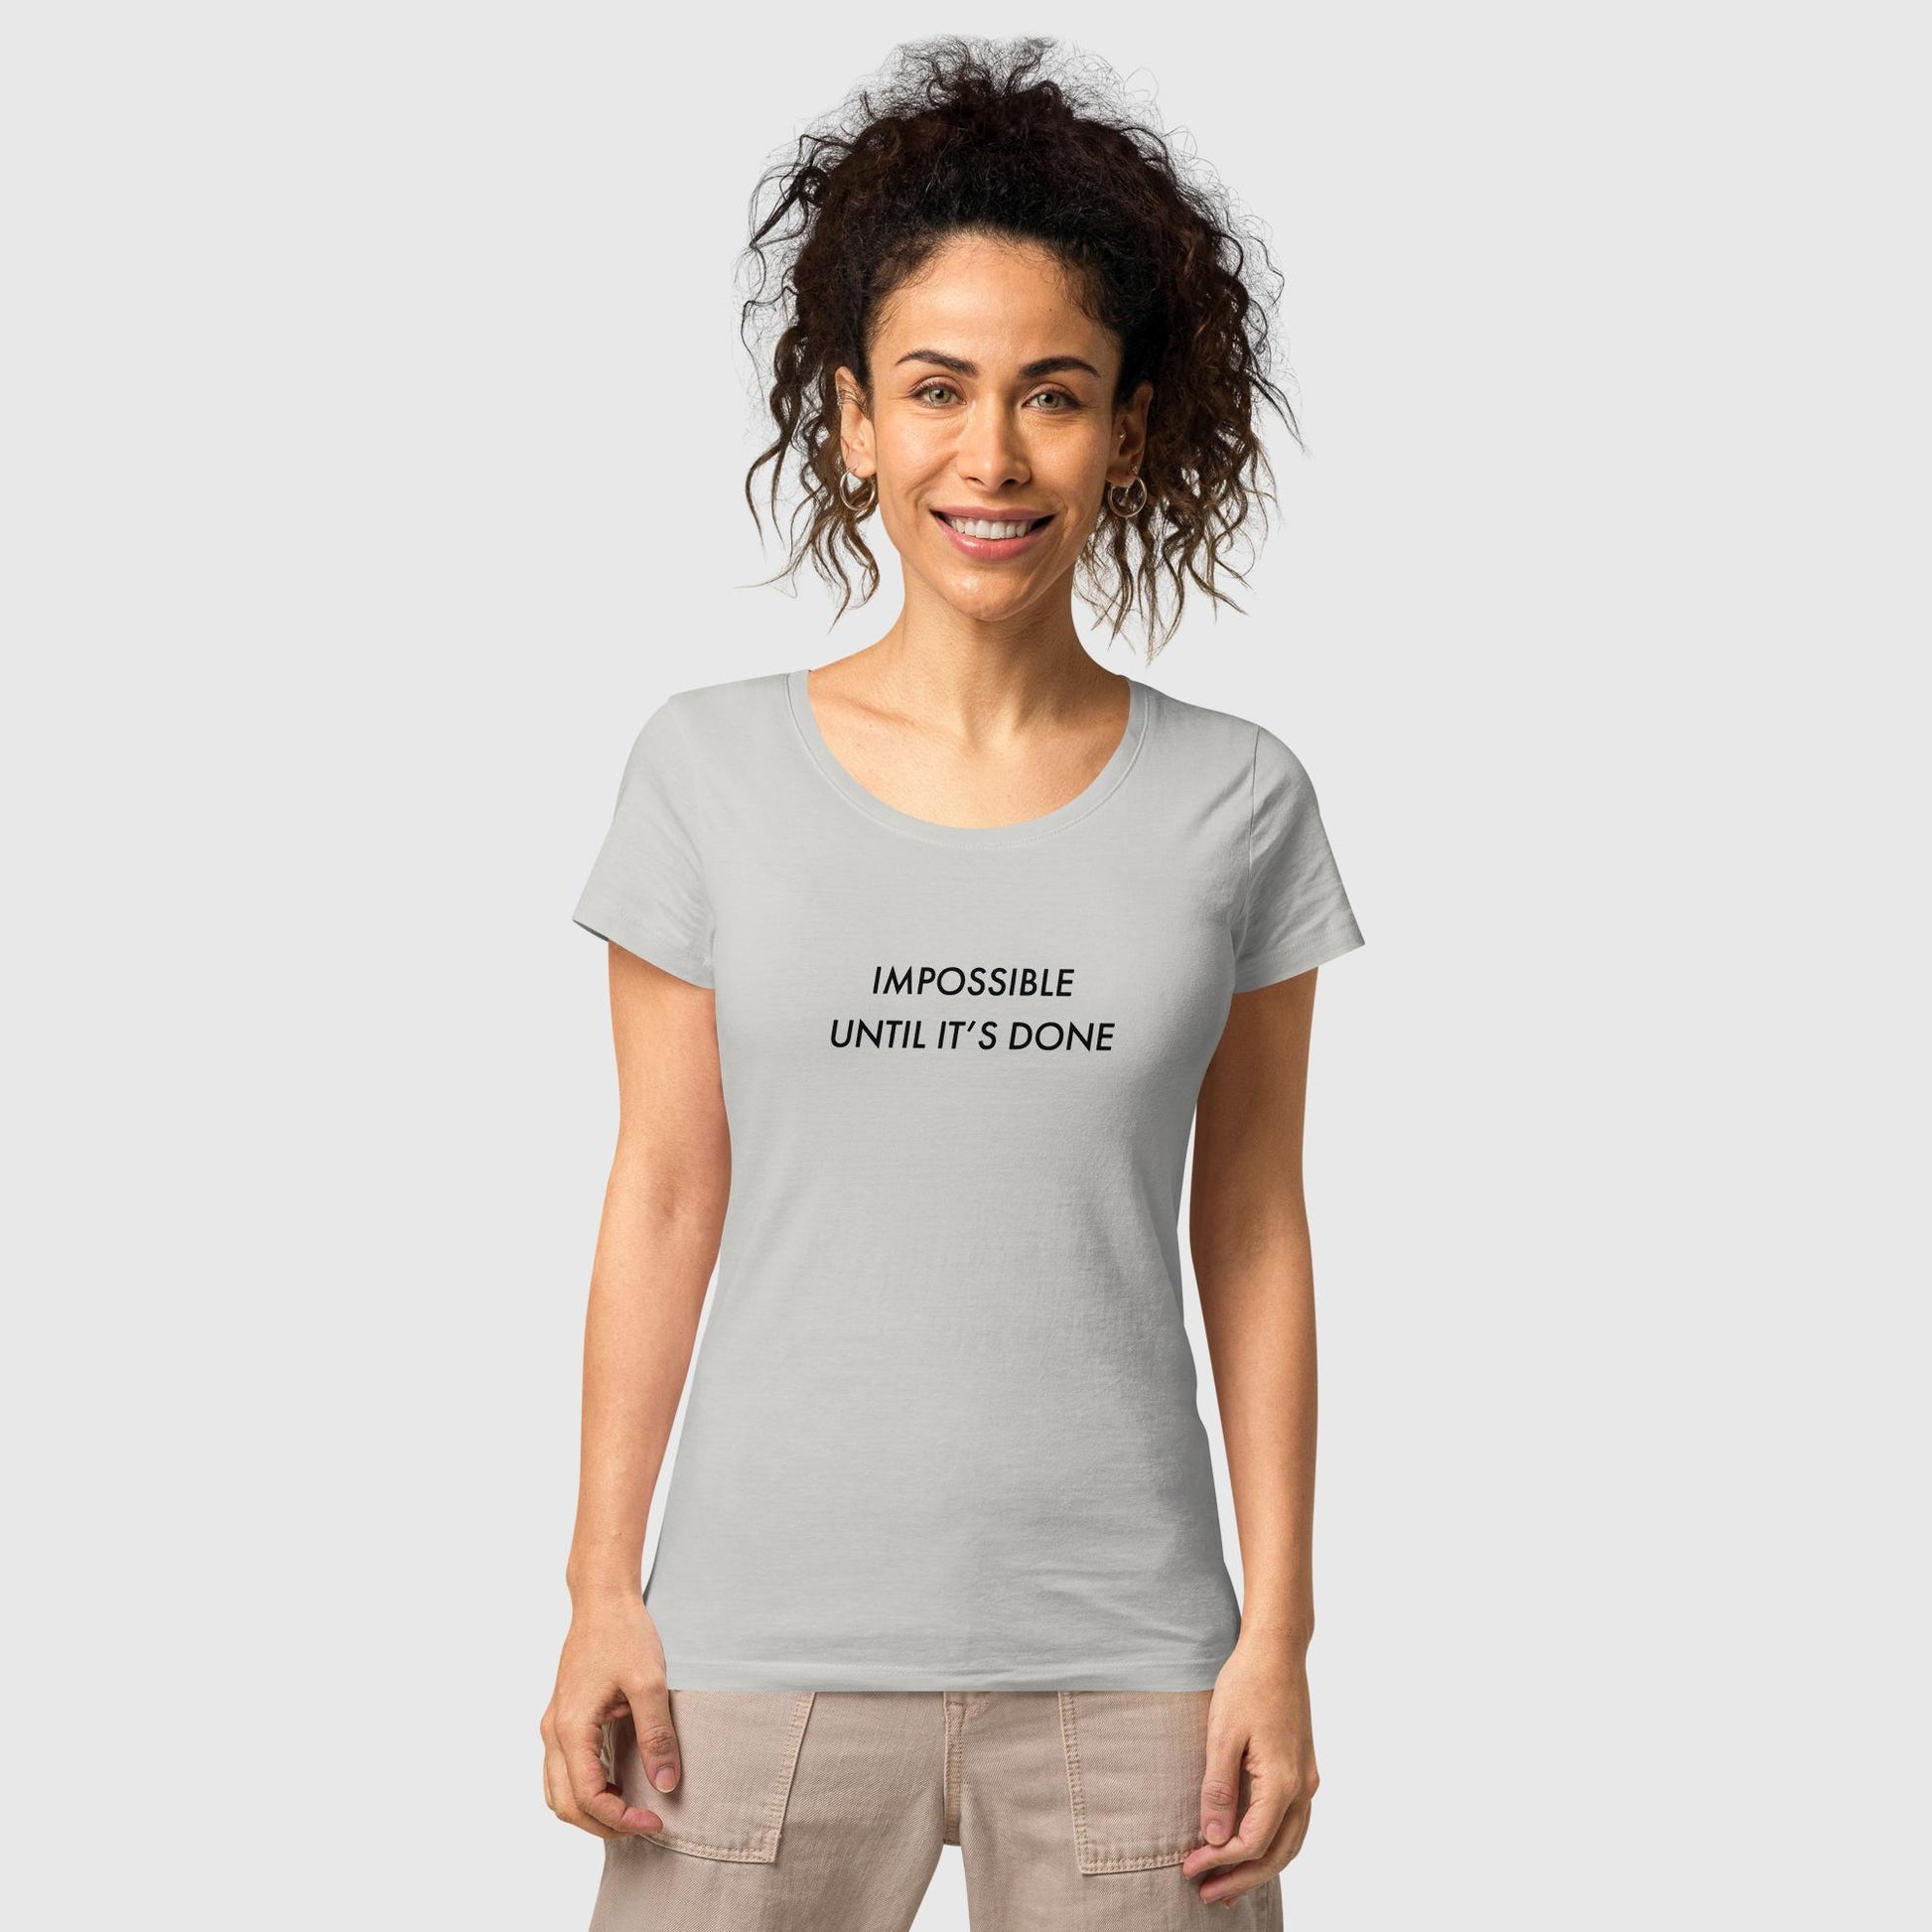 Women's gray organic cotton t-shirt that features, "Impossible Until It's Done," inspired by Nelson Mandela's inspirational quote, "It always seems impossible until it's done."